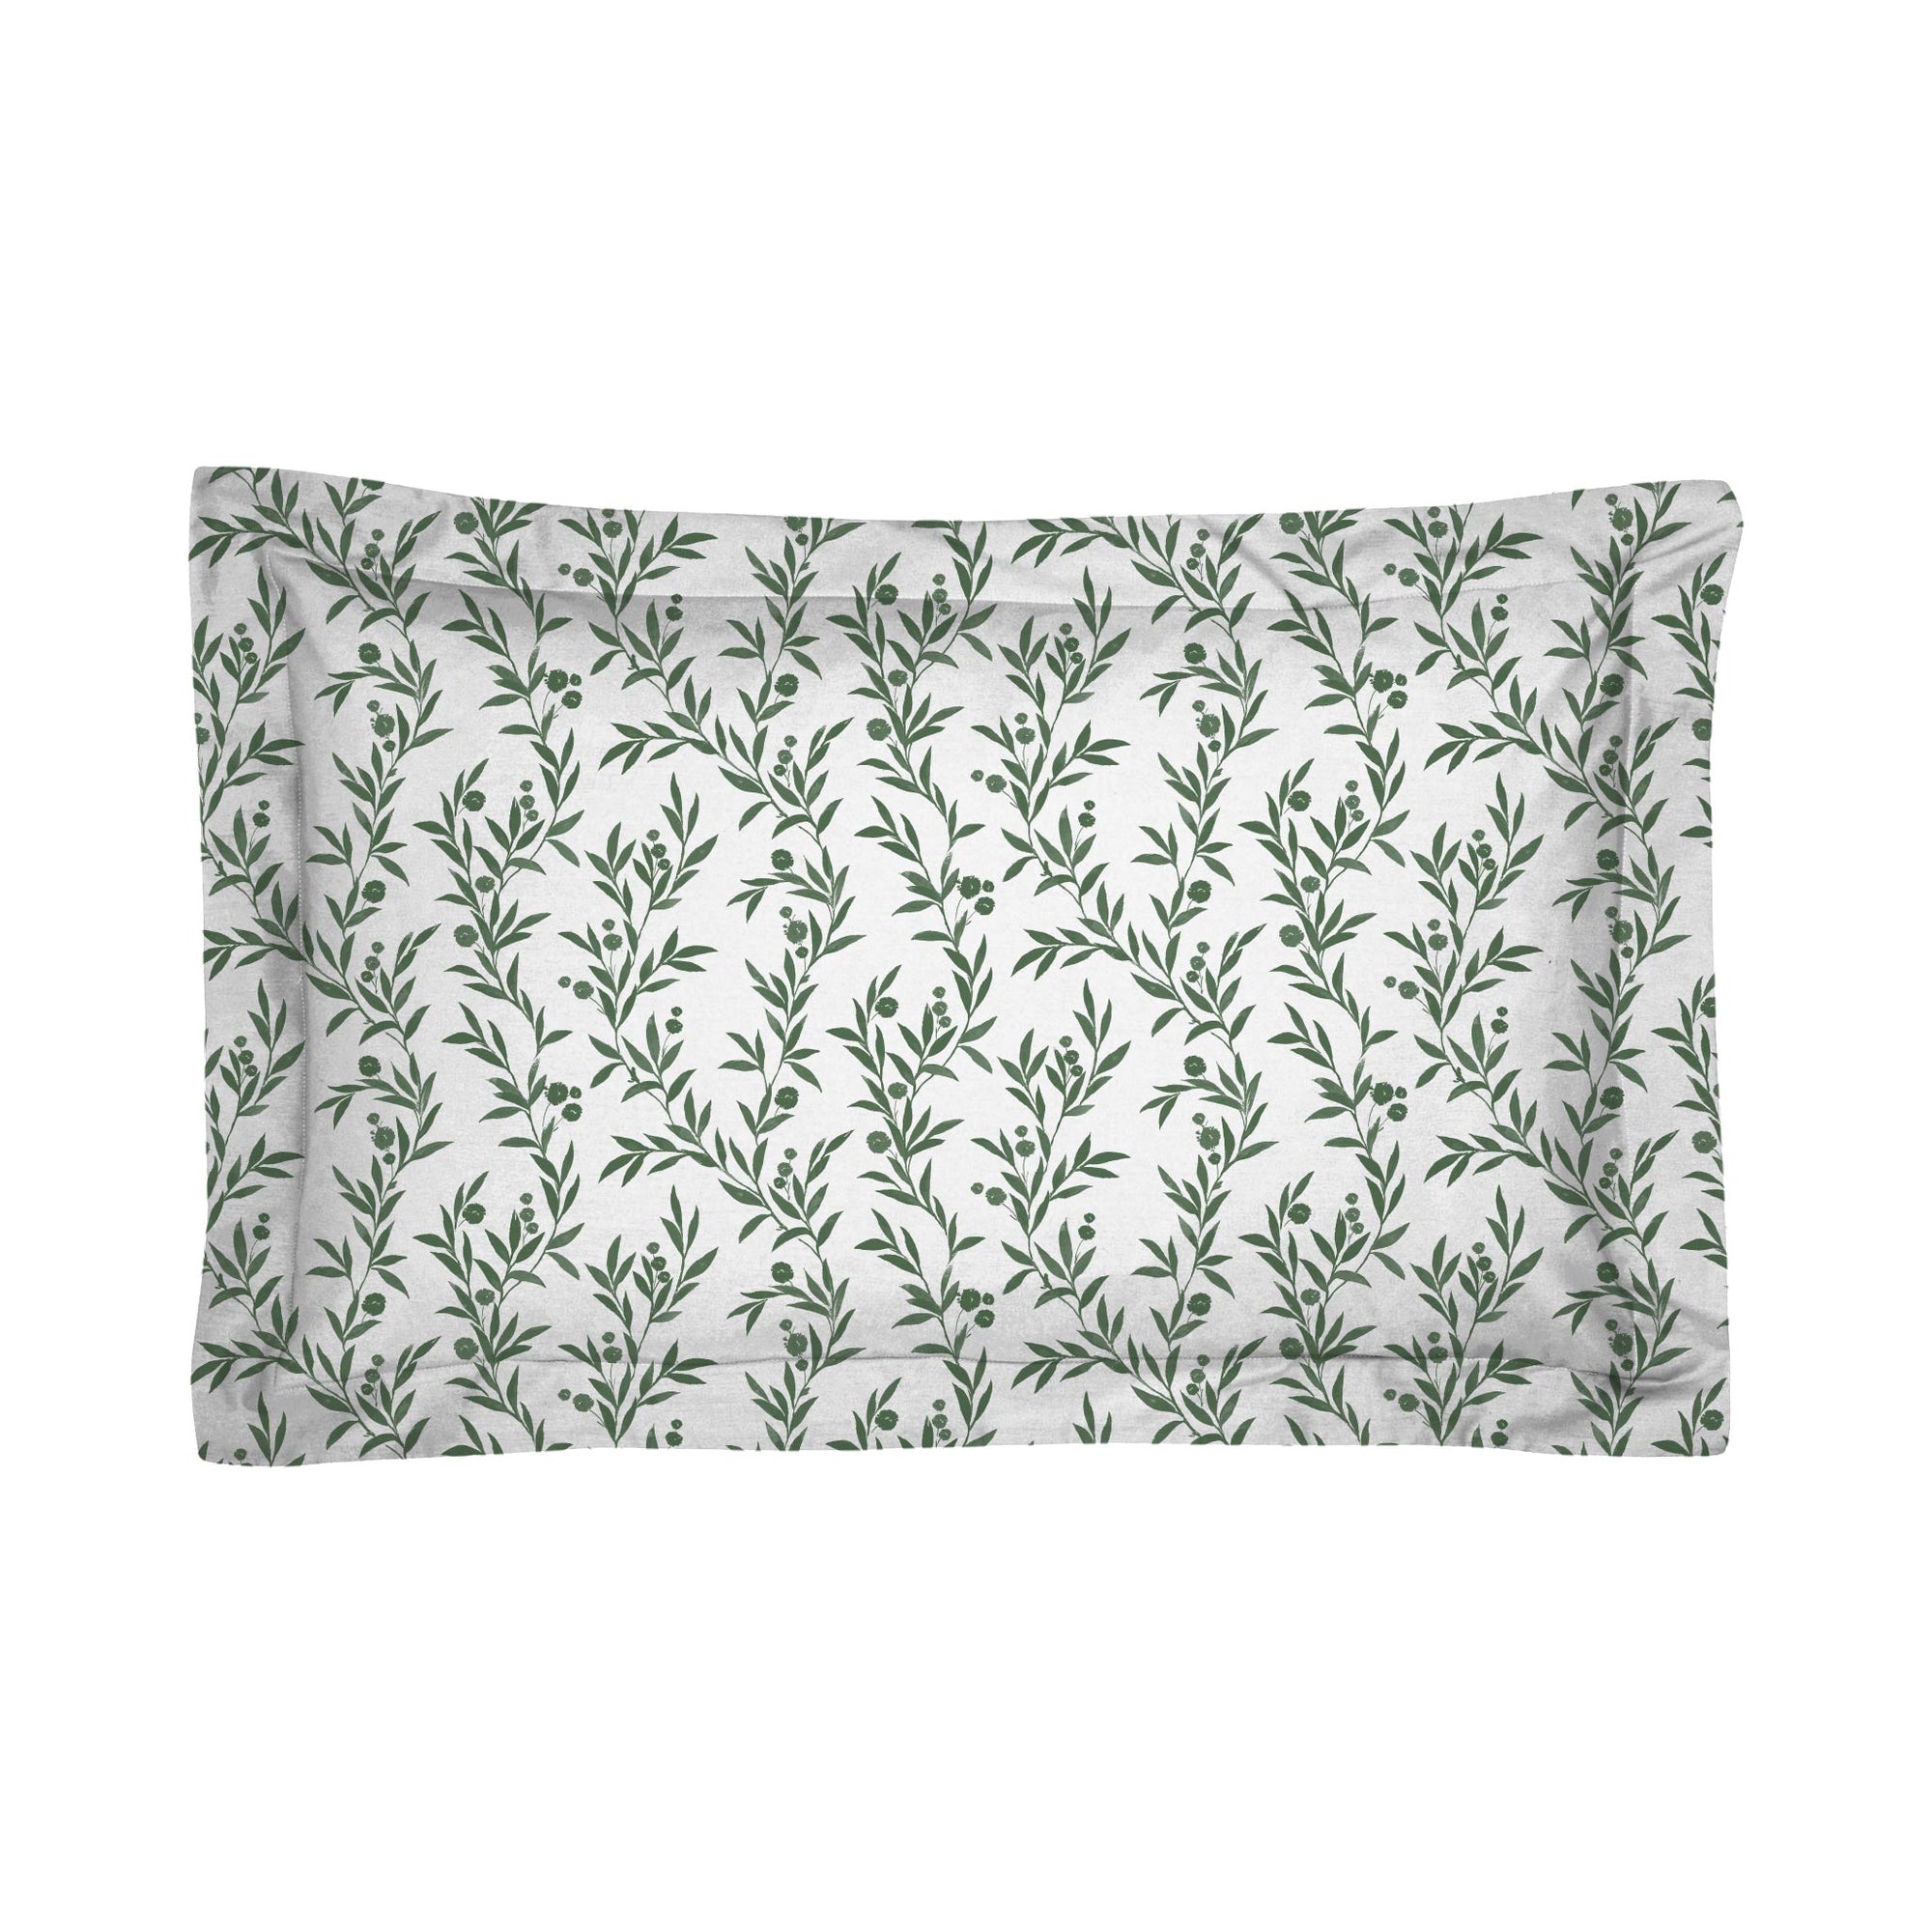 One Pair Pure Olive Green Floral 200TC Cotton Percale Oxford Pillowcase